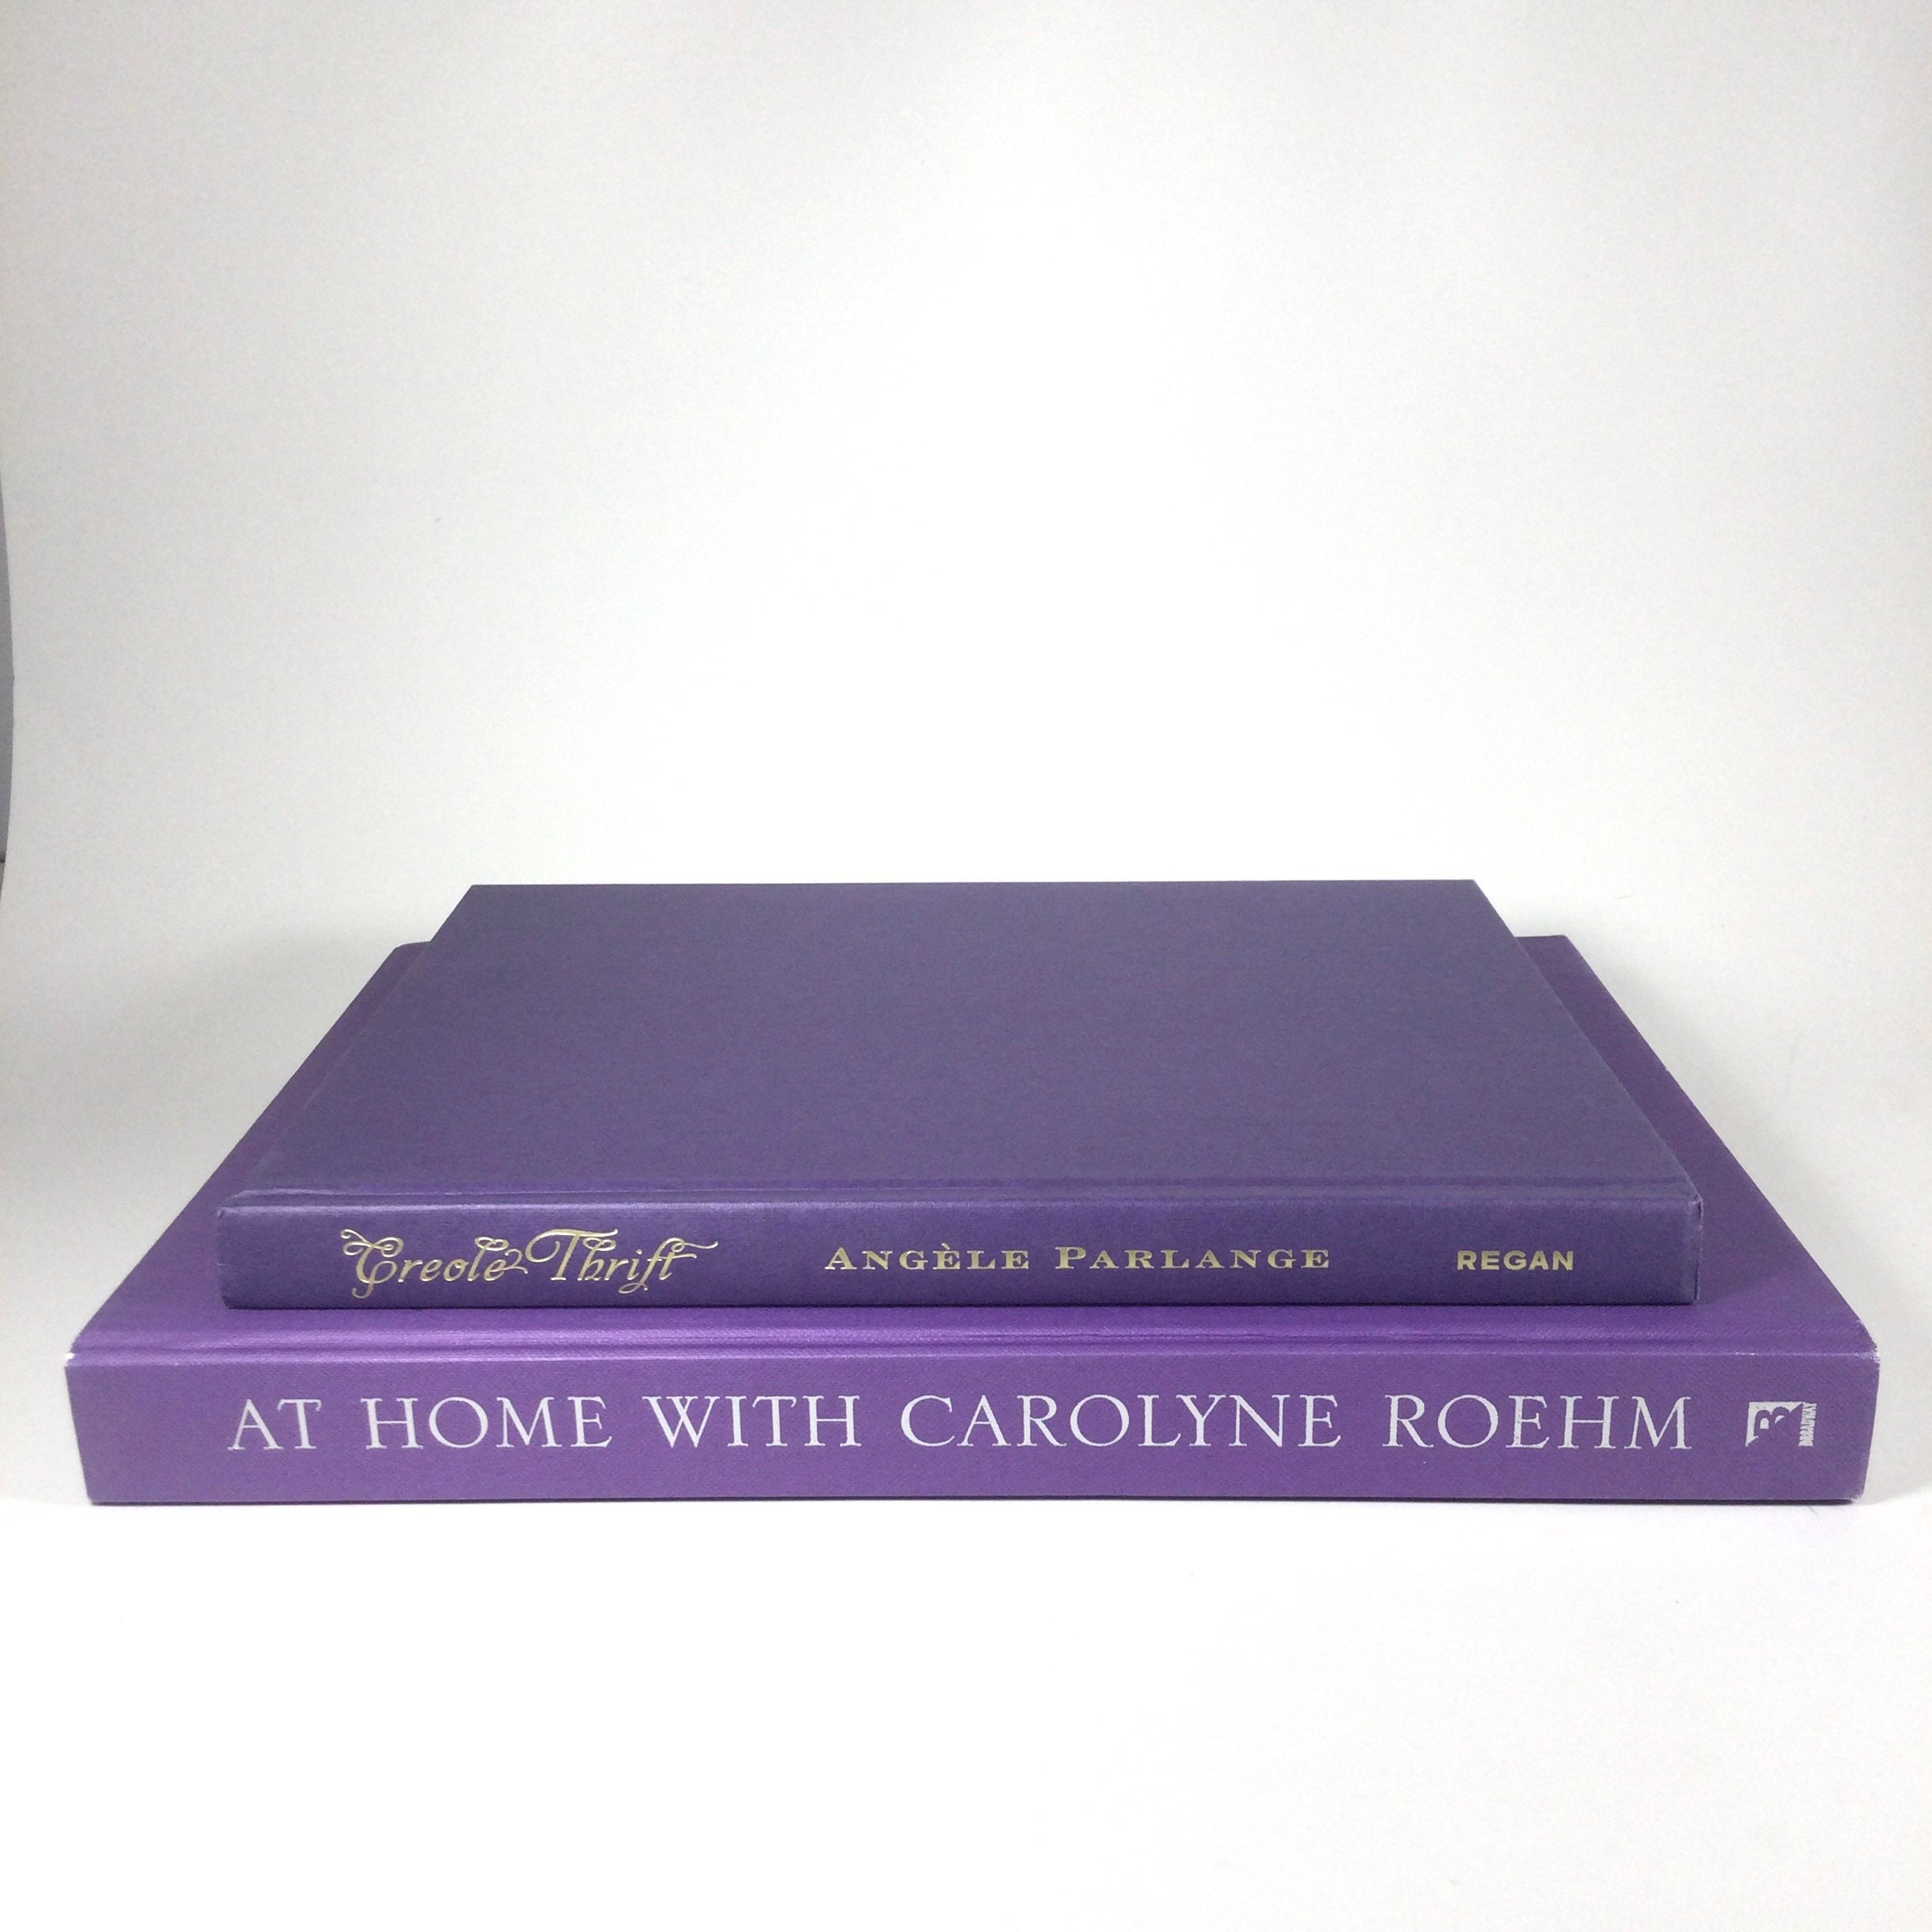 2012 1st Ed Assouline Big Book of Chic Coffee Table Book Lavender